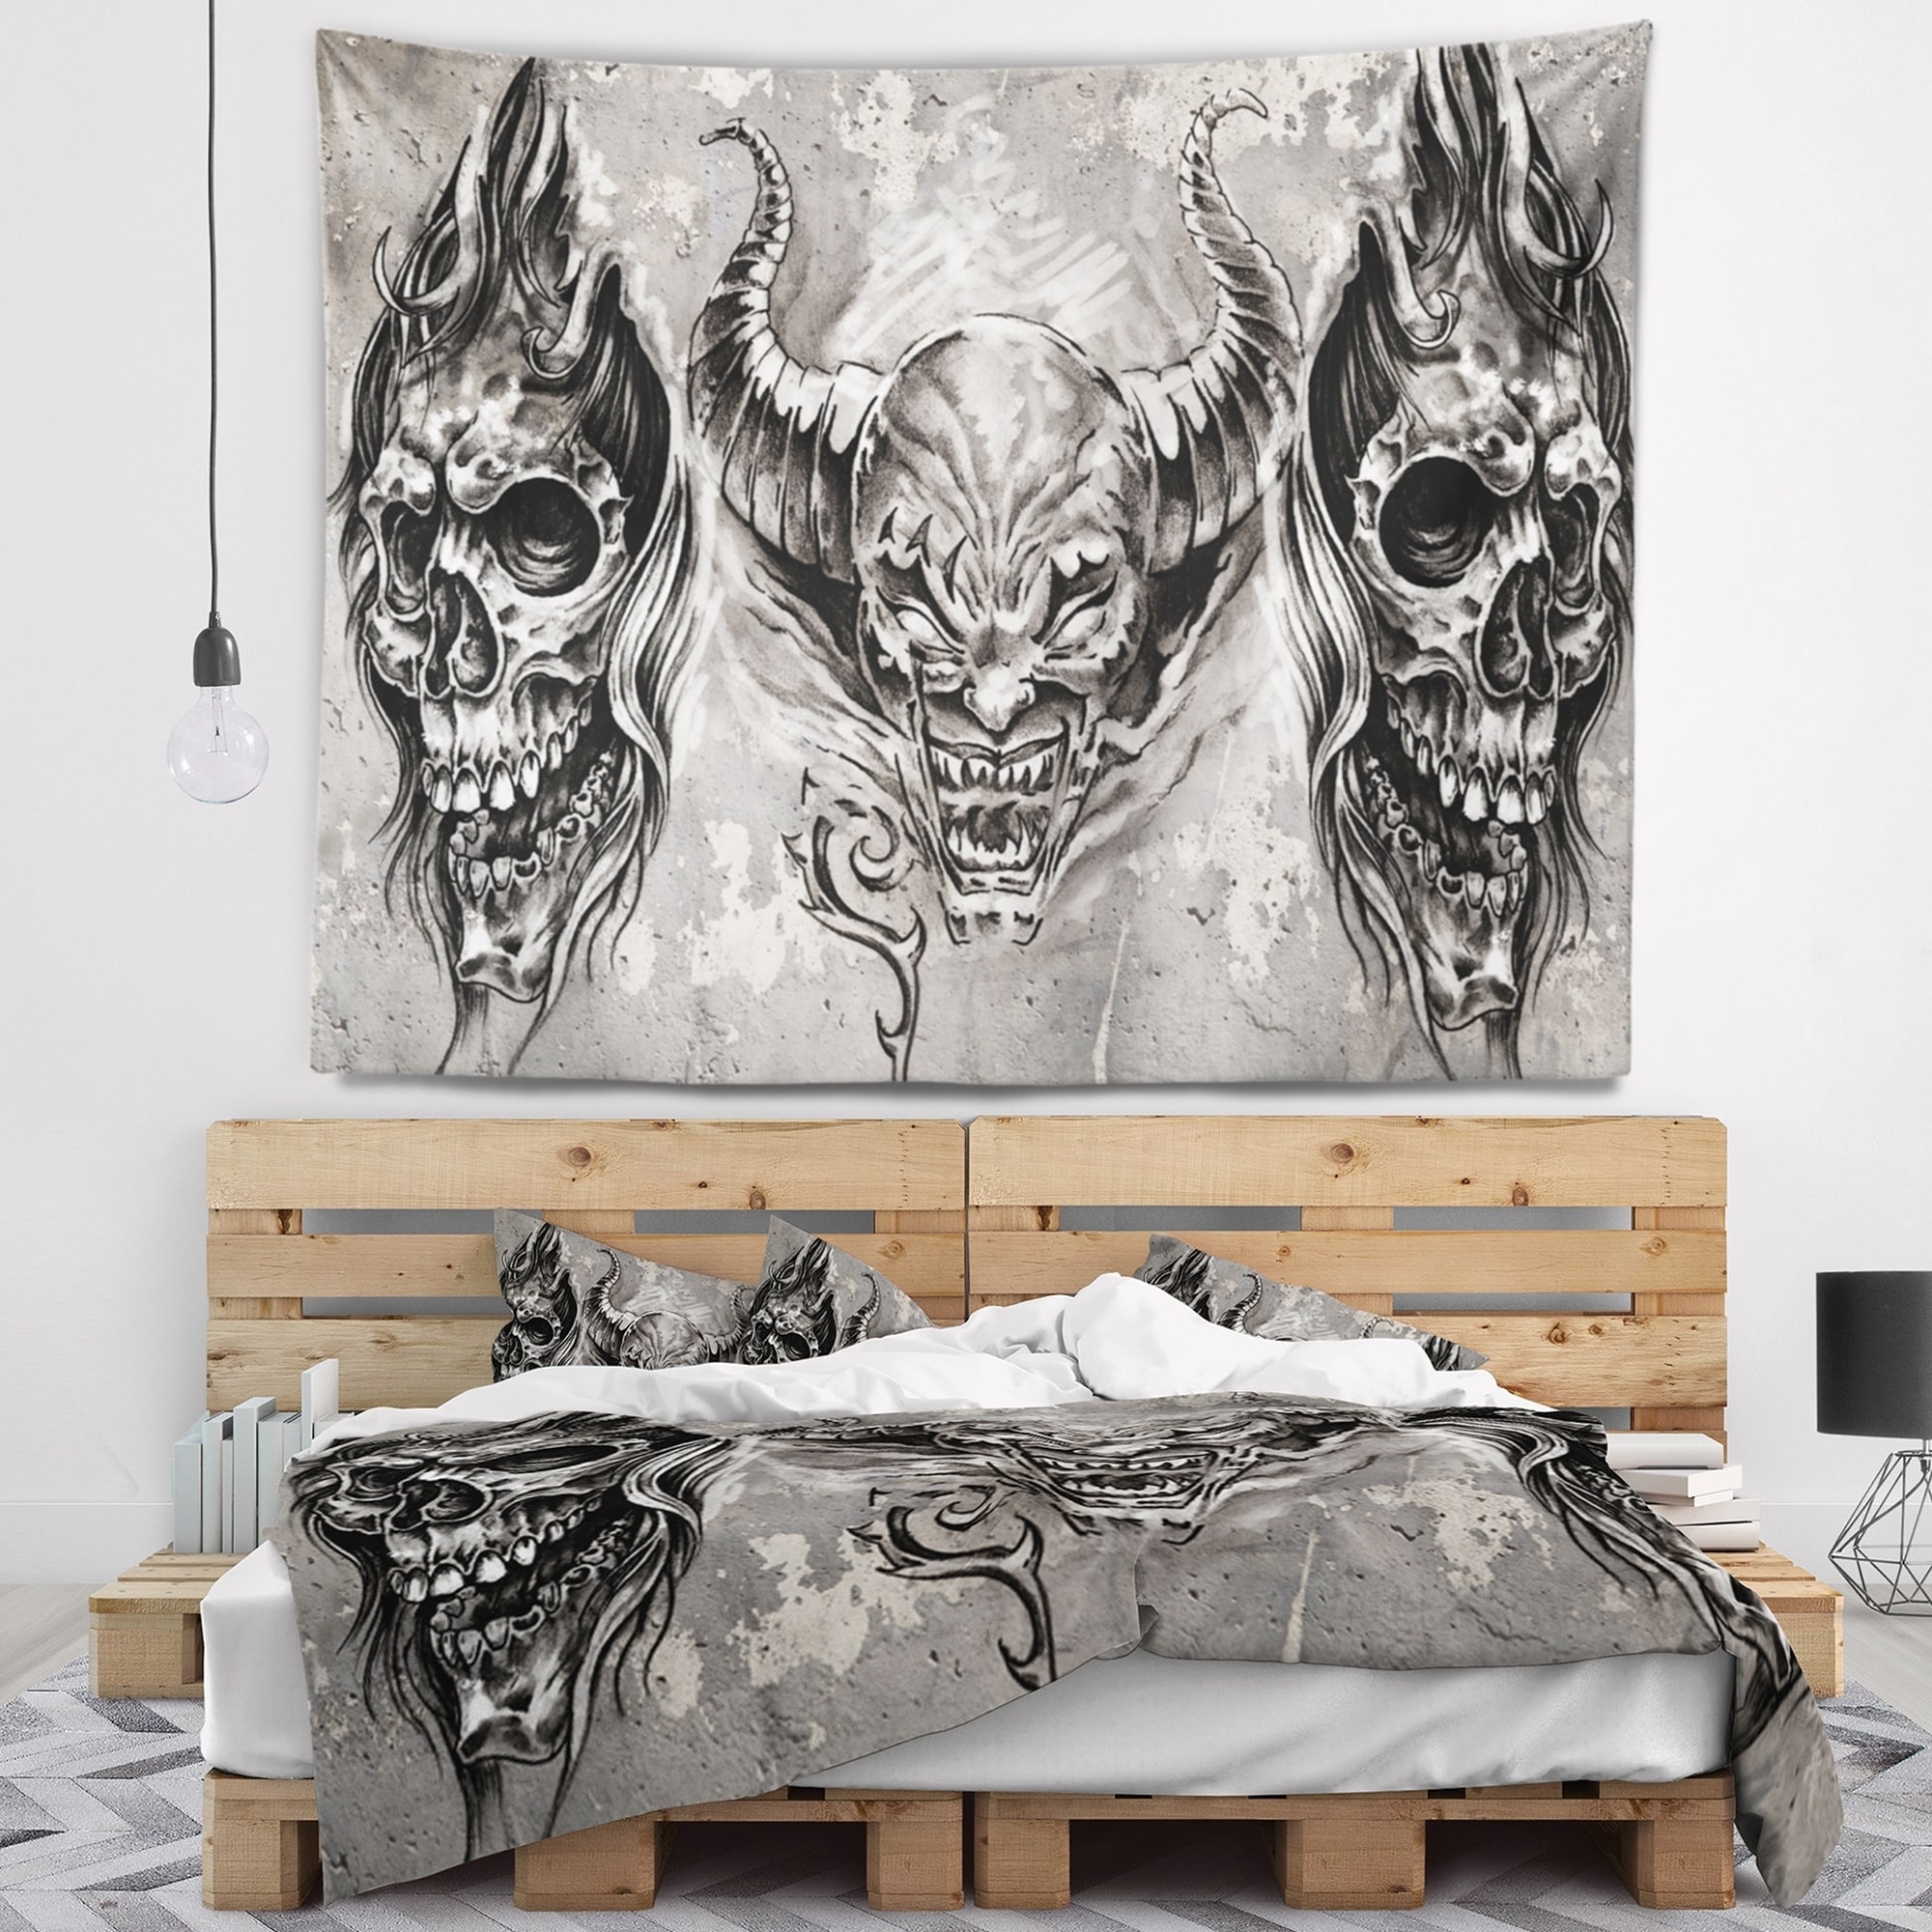 Tattoo Skull Tapestry Art Wall Hanging Sofa Table Bed Cover Home Decor